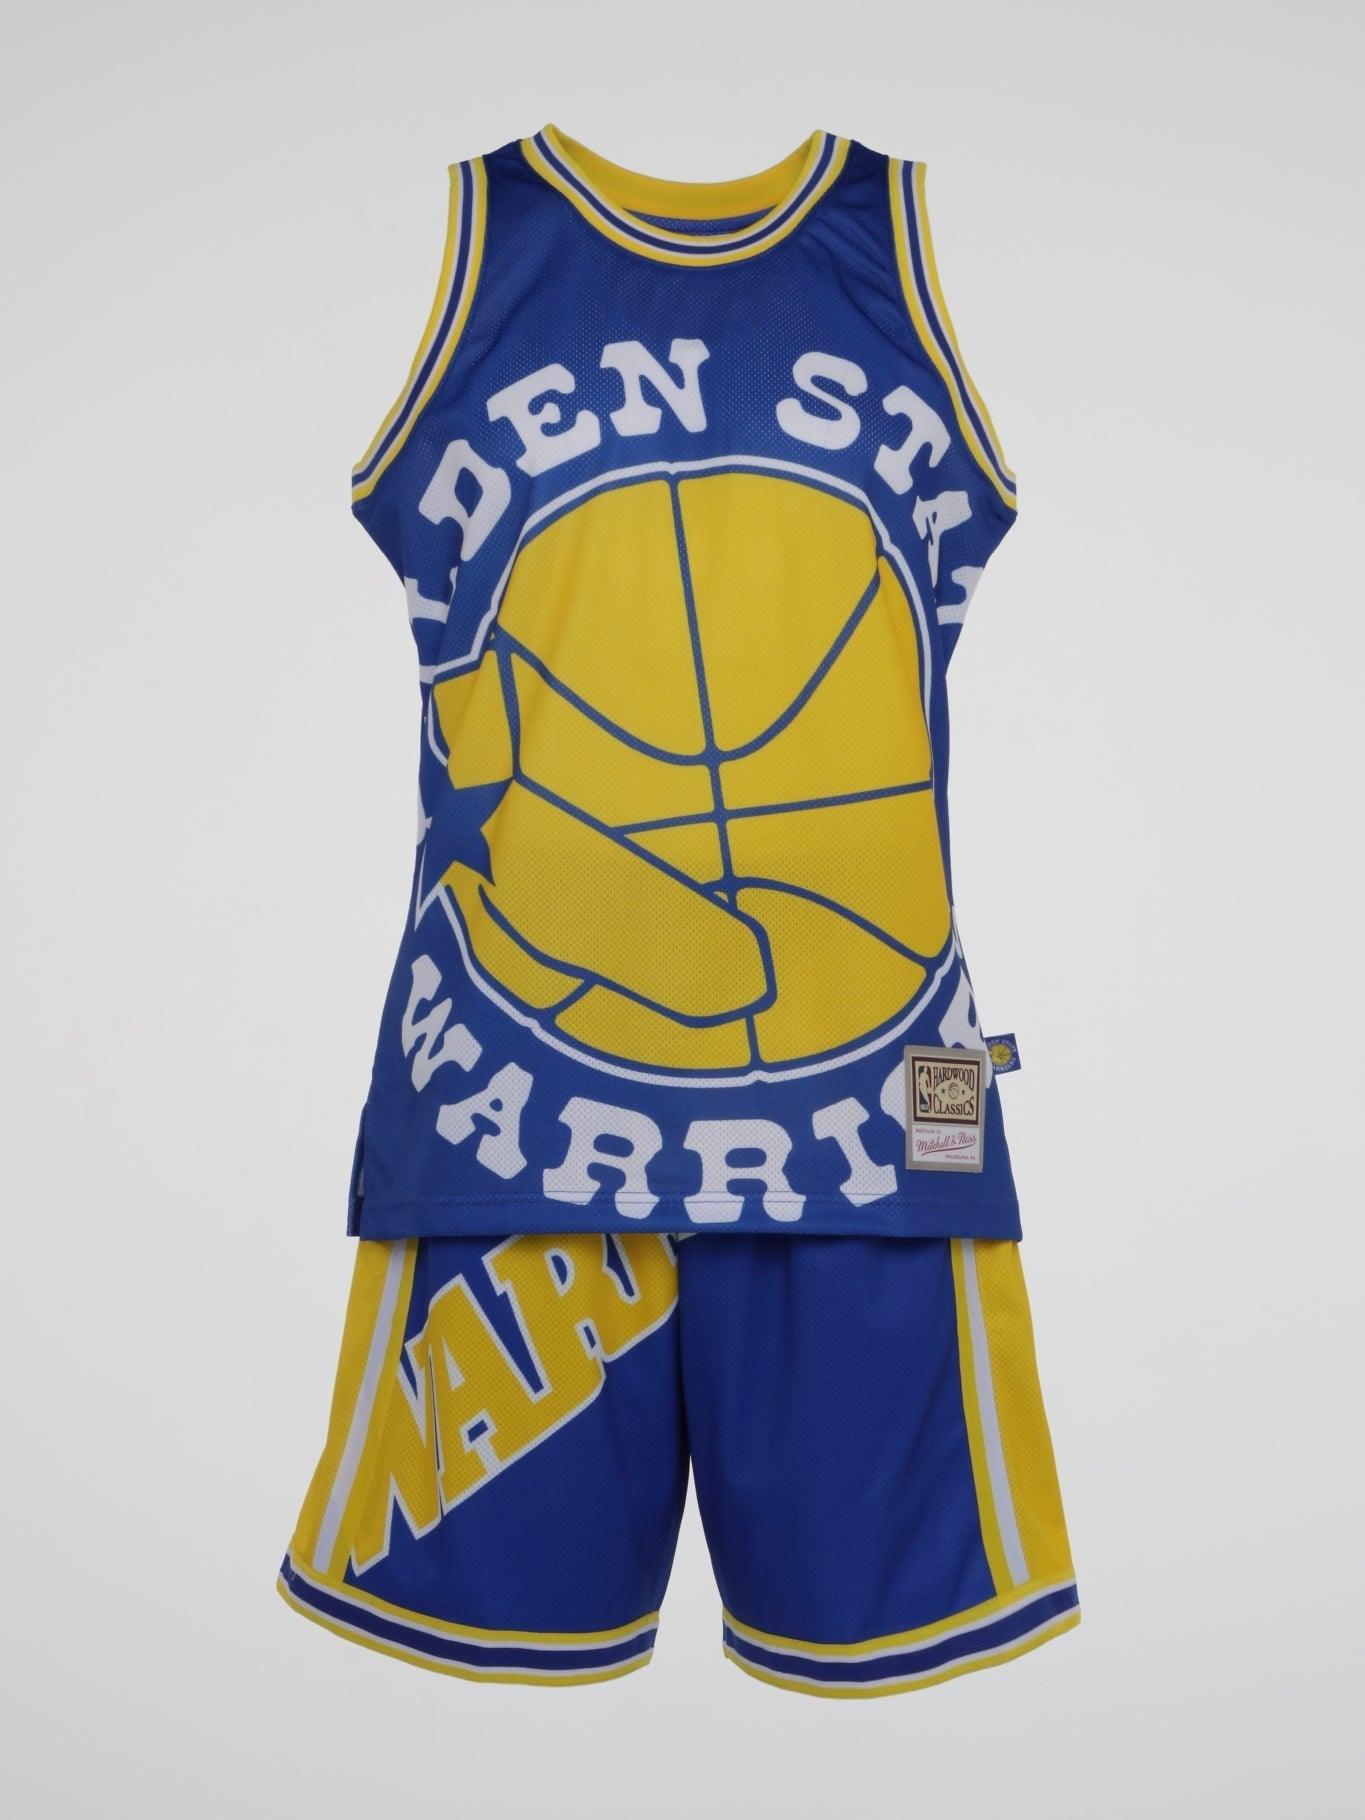 Golden State Warriors Blown Out Fashion Shorts - B-Hype Society